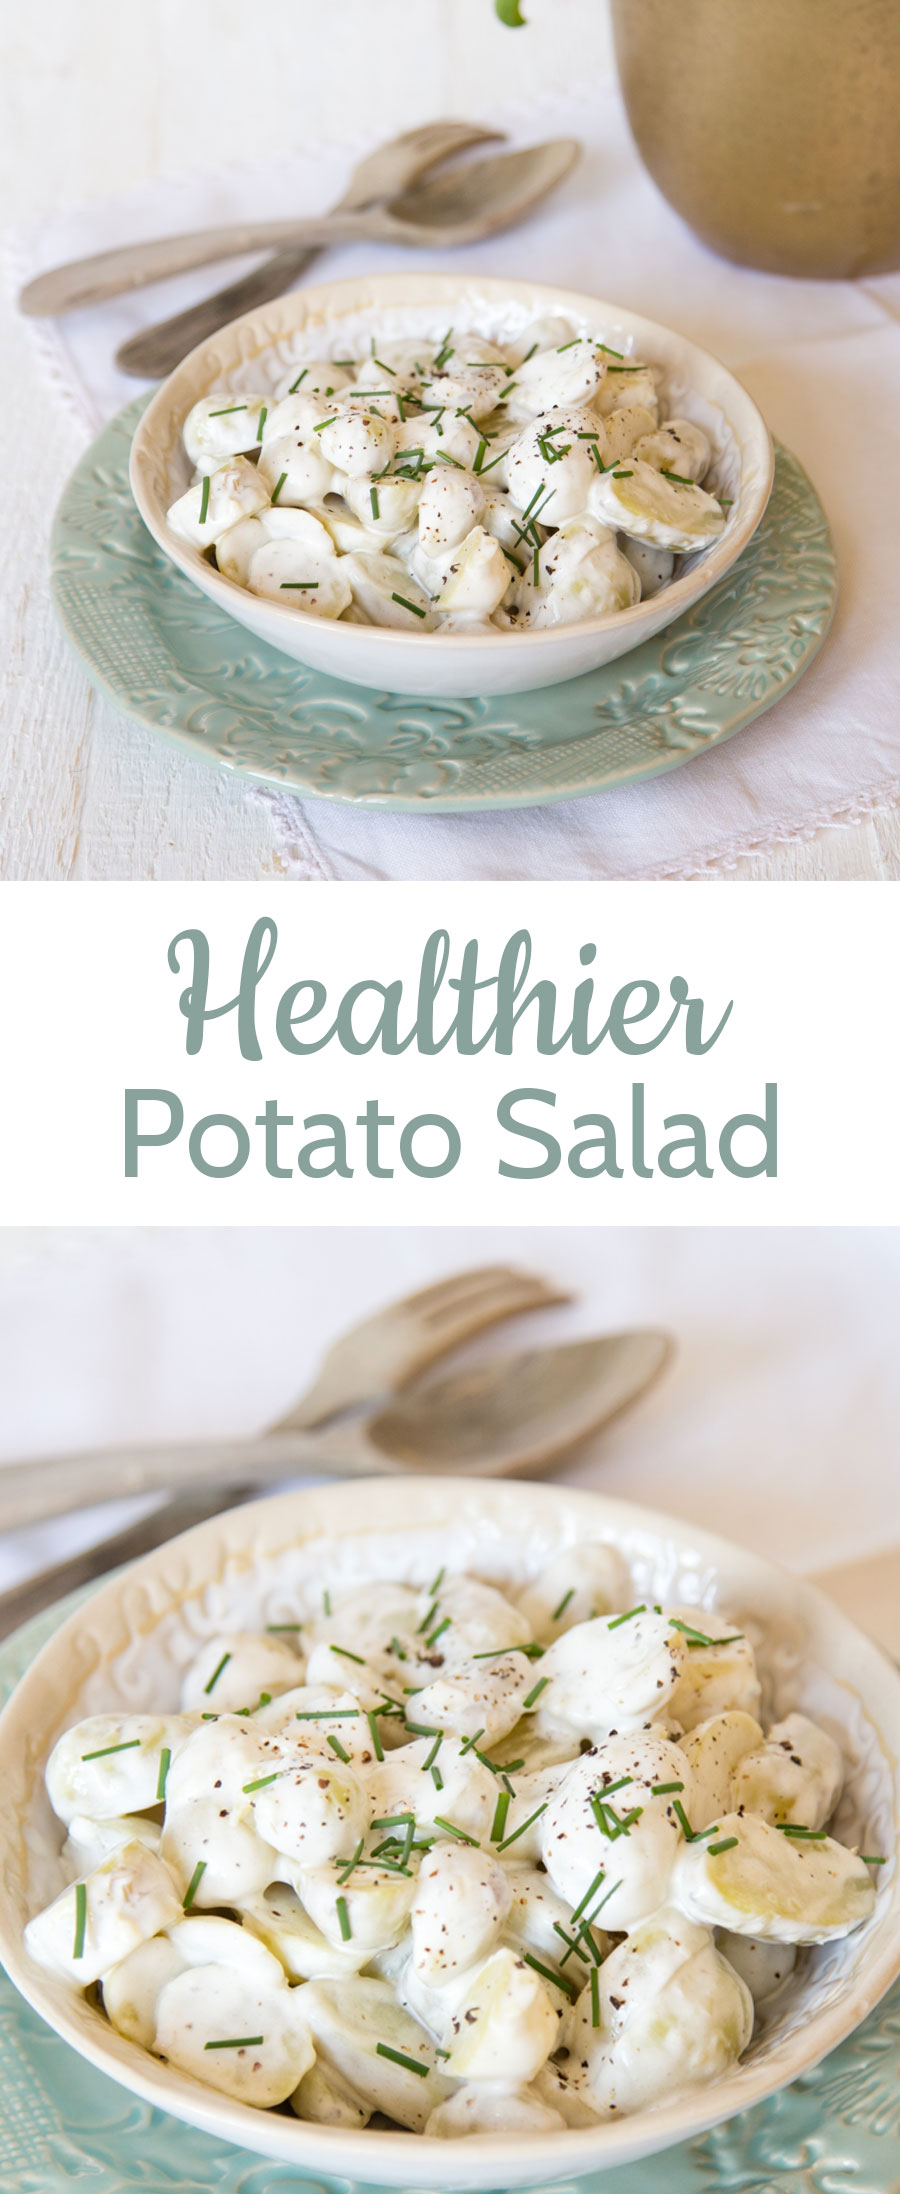 A simple substitution makes this potato salad far more healthy without compromising on taste.